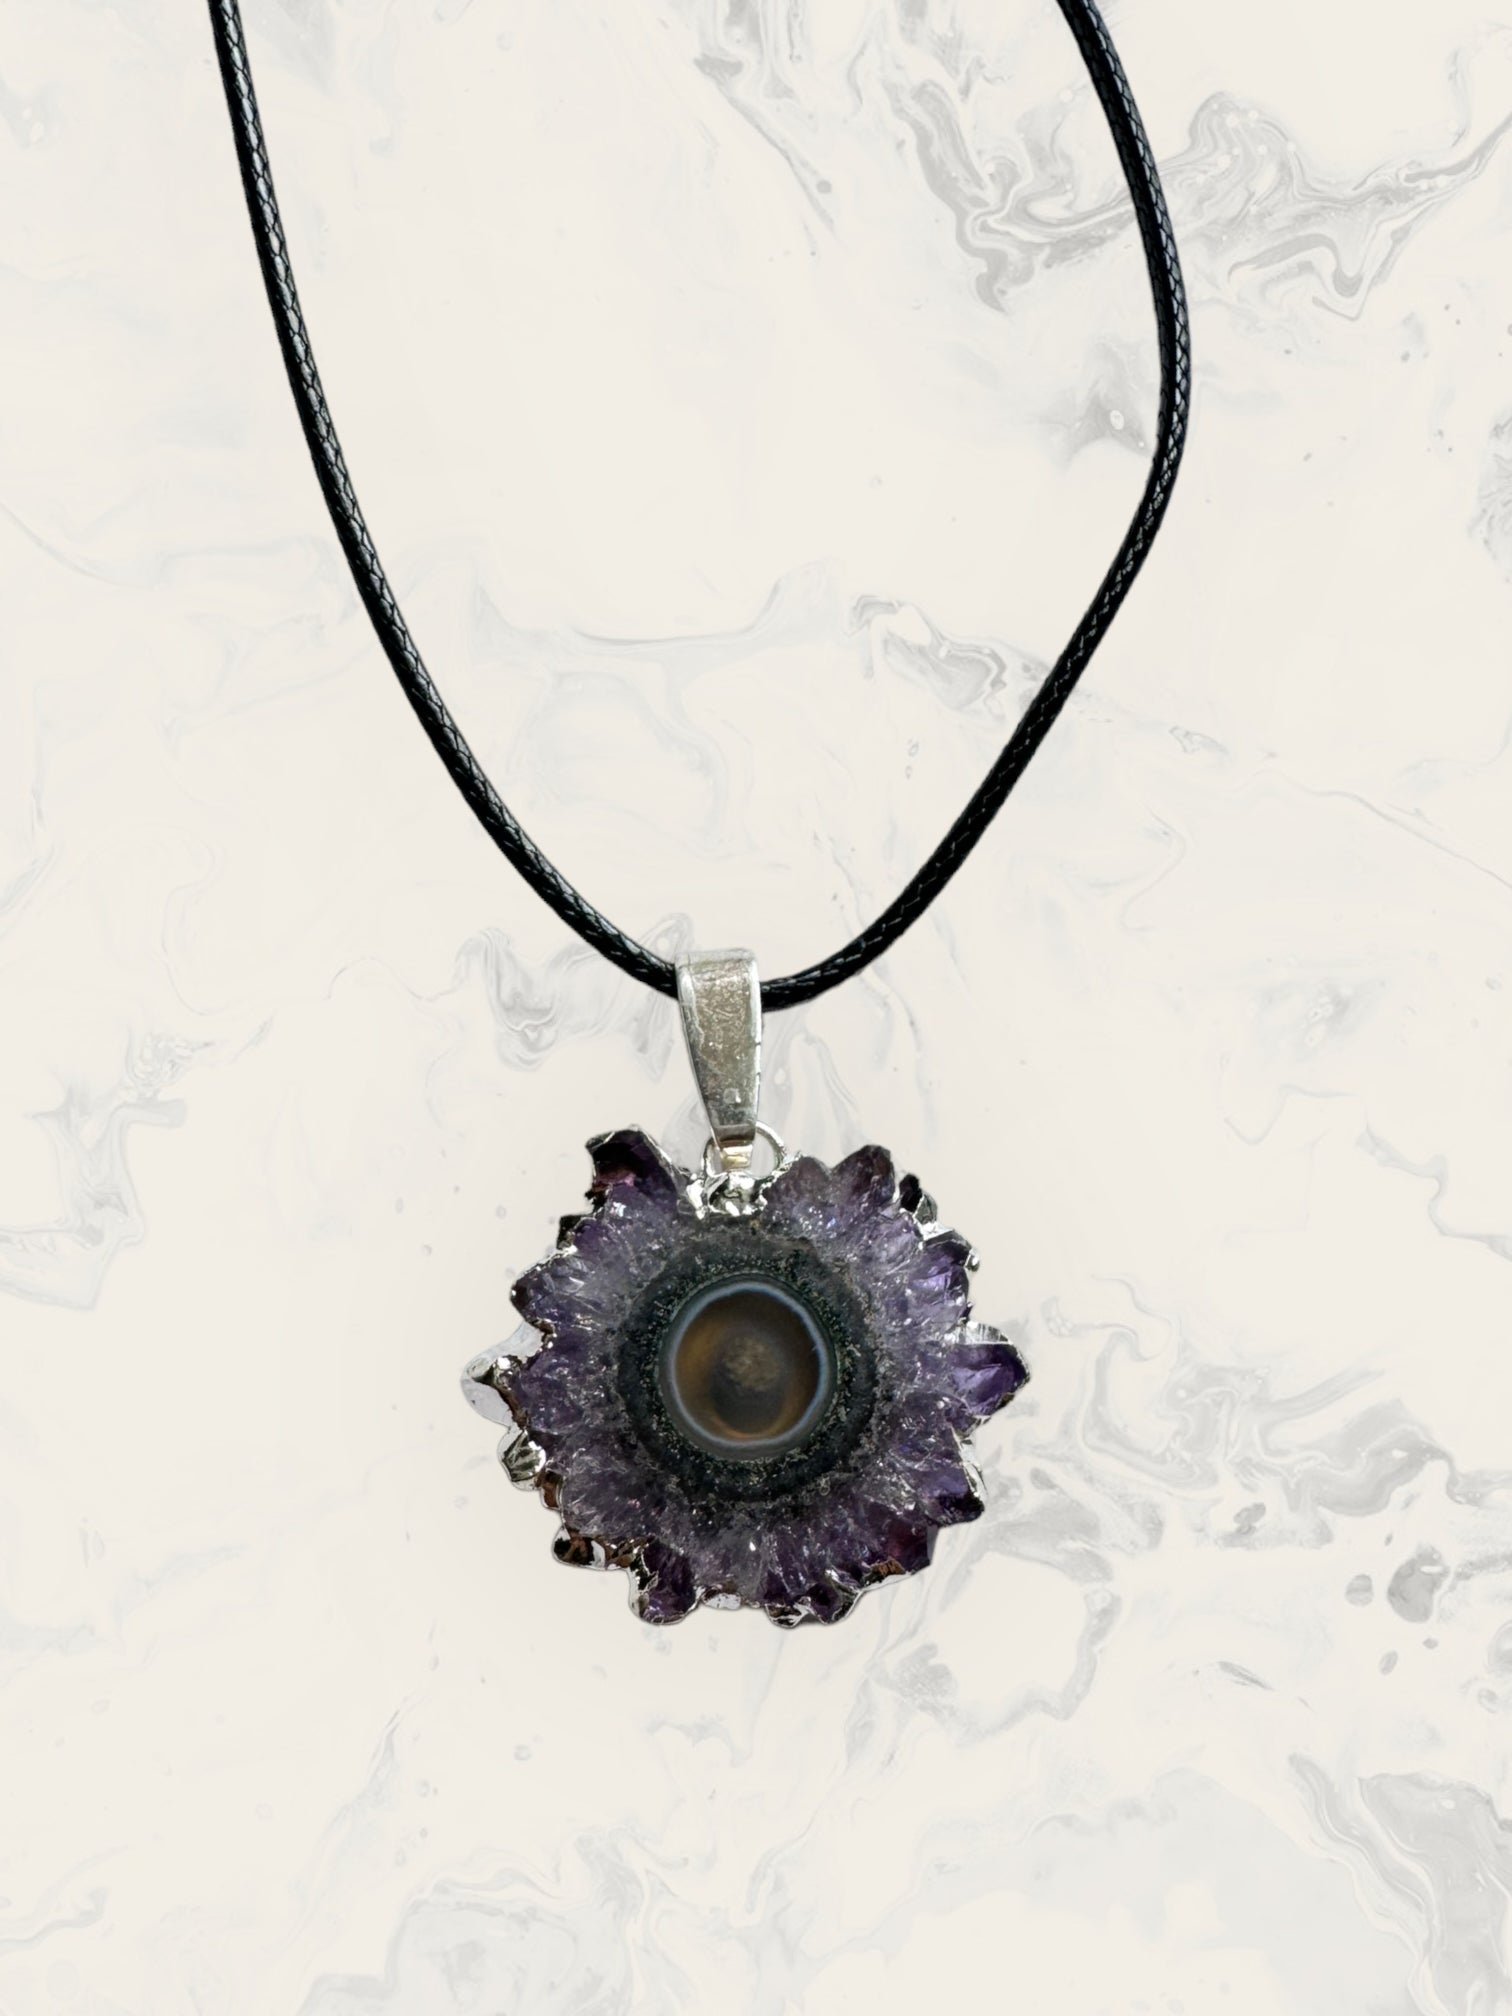 Frequency Jewelry Natural Pain Relief and Protection from 5G and EMFs Amethyst Sliced Geode Necklace